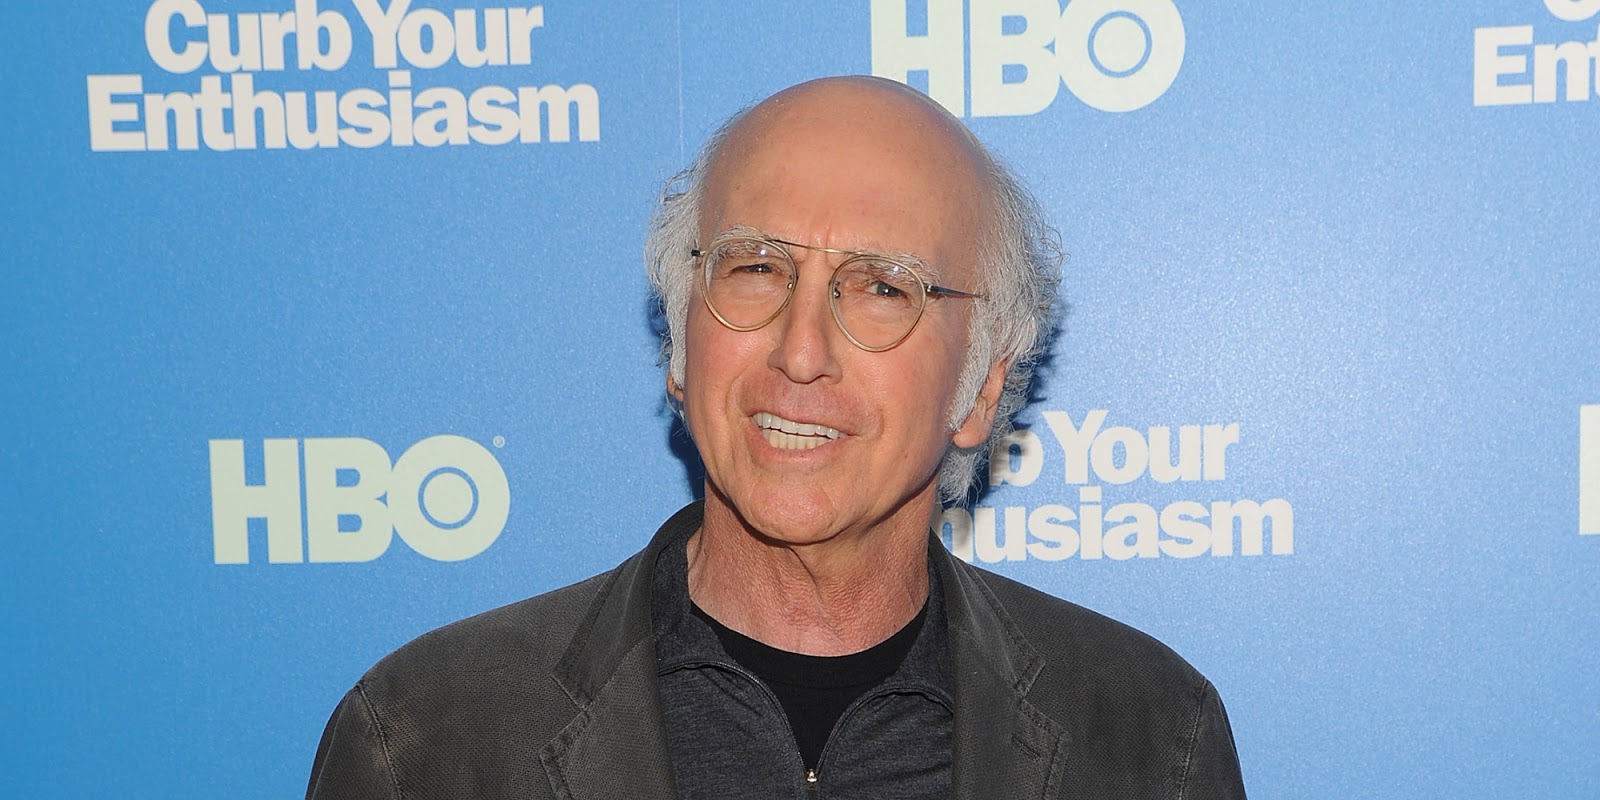 Larry David Confirms New Season of Curb Your Enthusiasm - Planet of the Sanquon1600 x 800